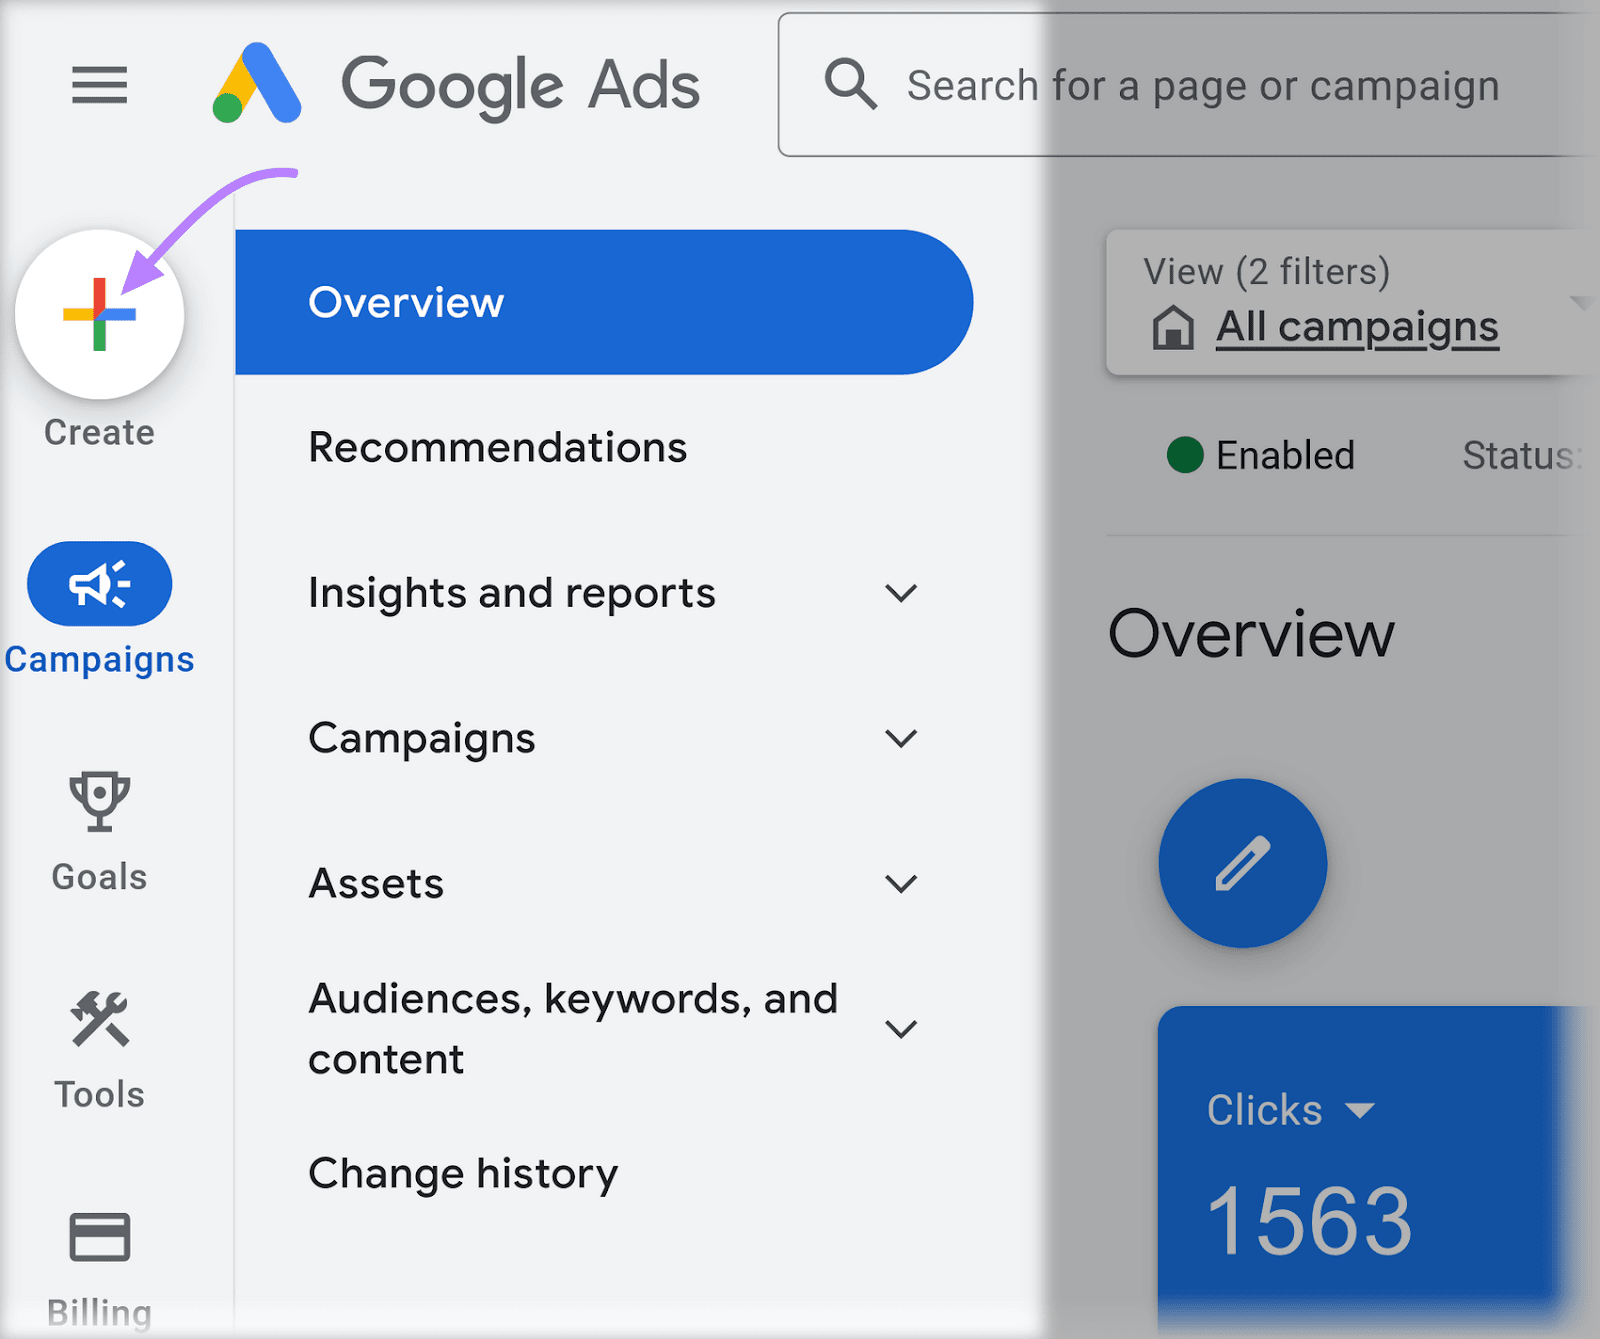 Google Ads user interface showing the navigation menu on the left with a purple arrow pointing to the "Create" button.